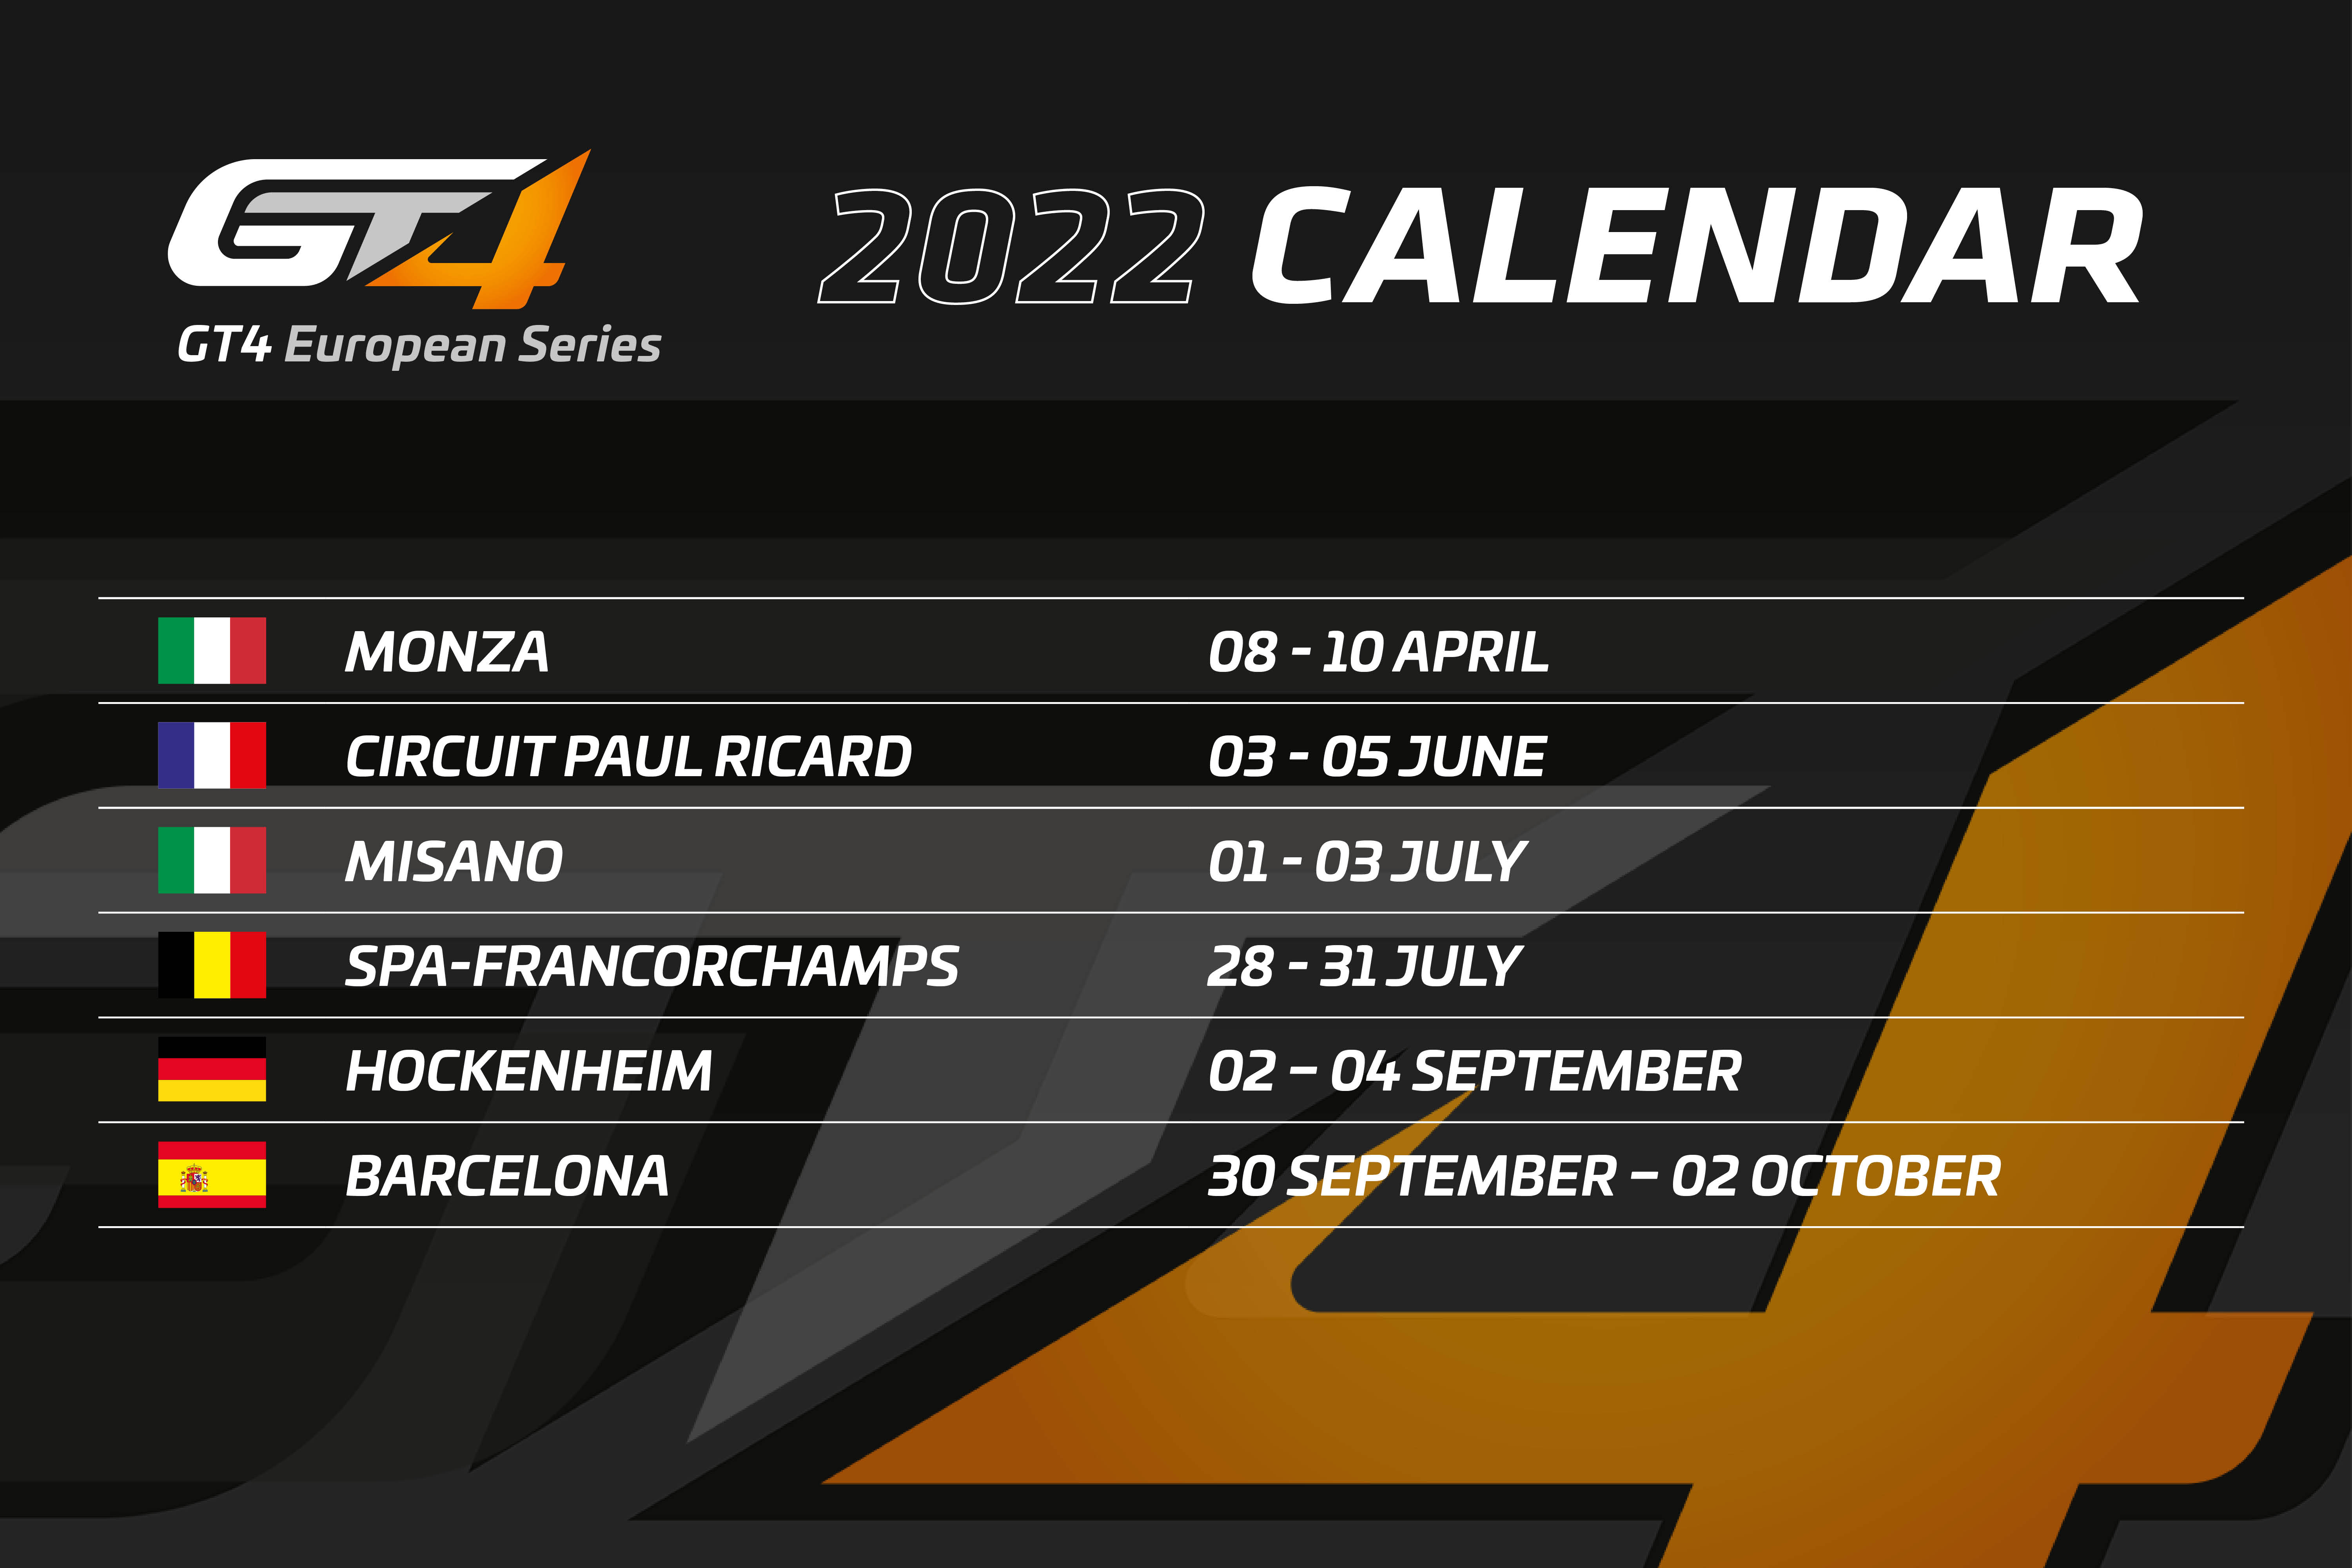 European And American Series Among First Set Of 2022 Calendars